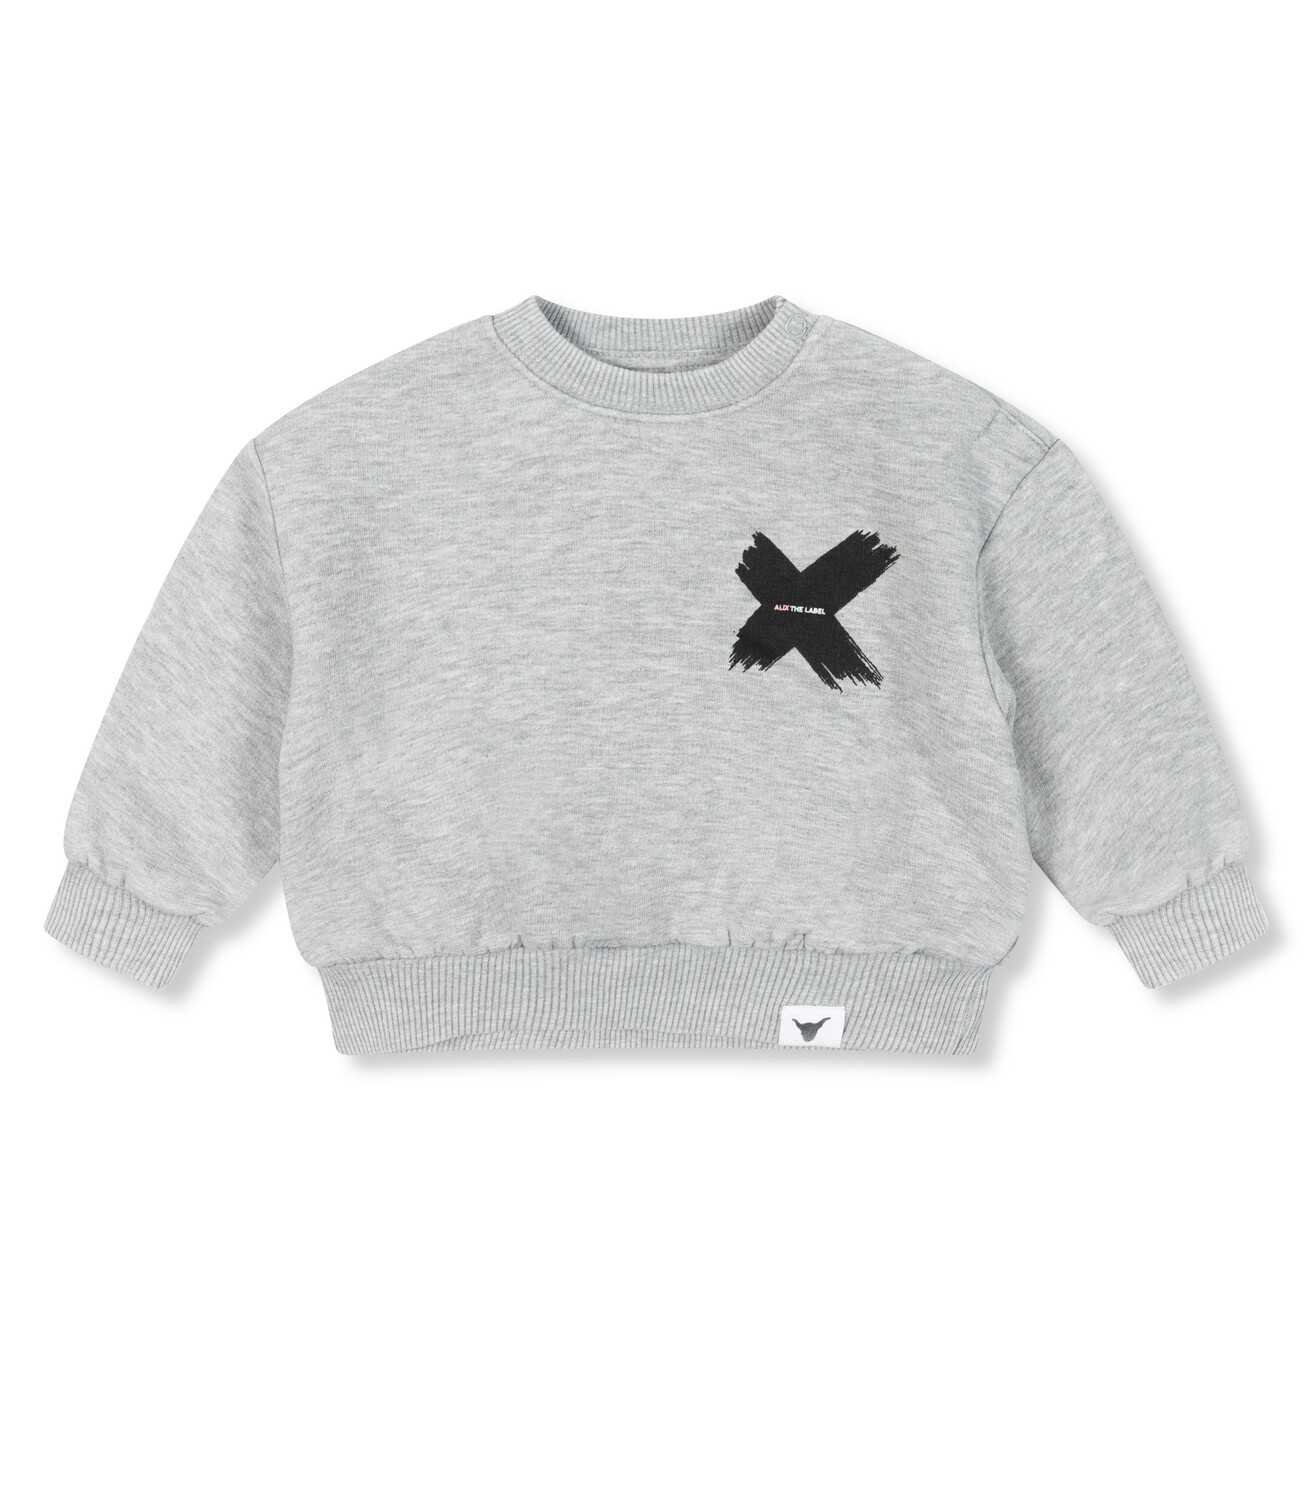 Baby knitted X sweater